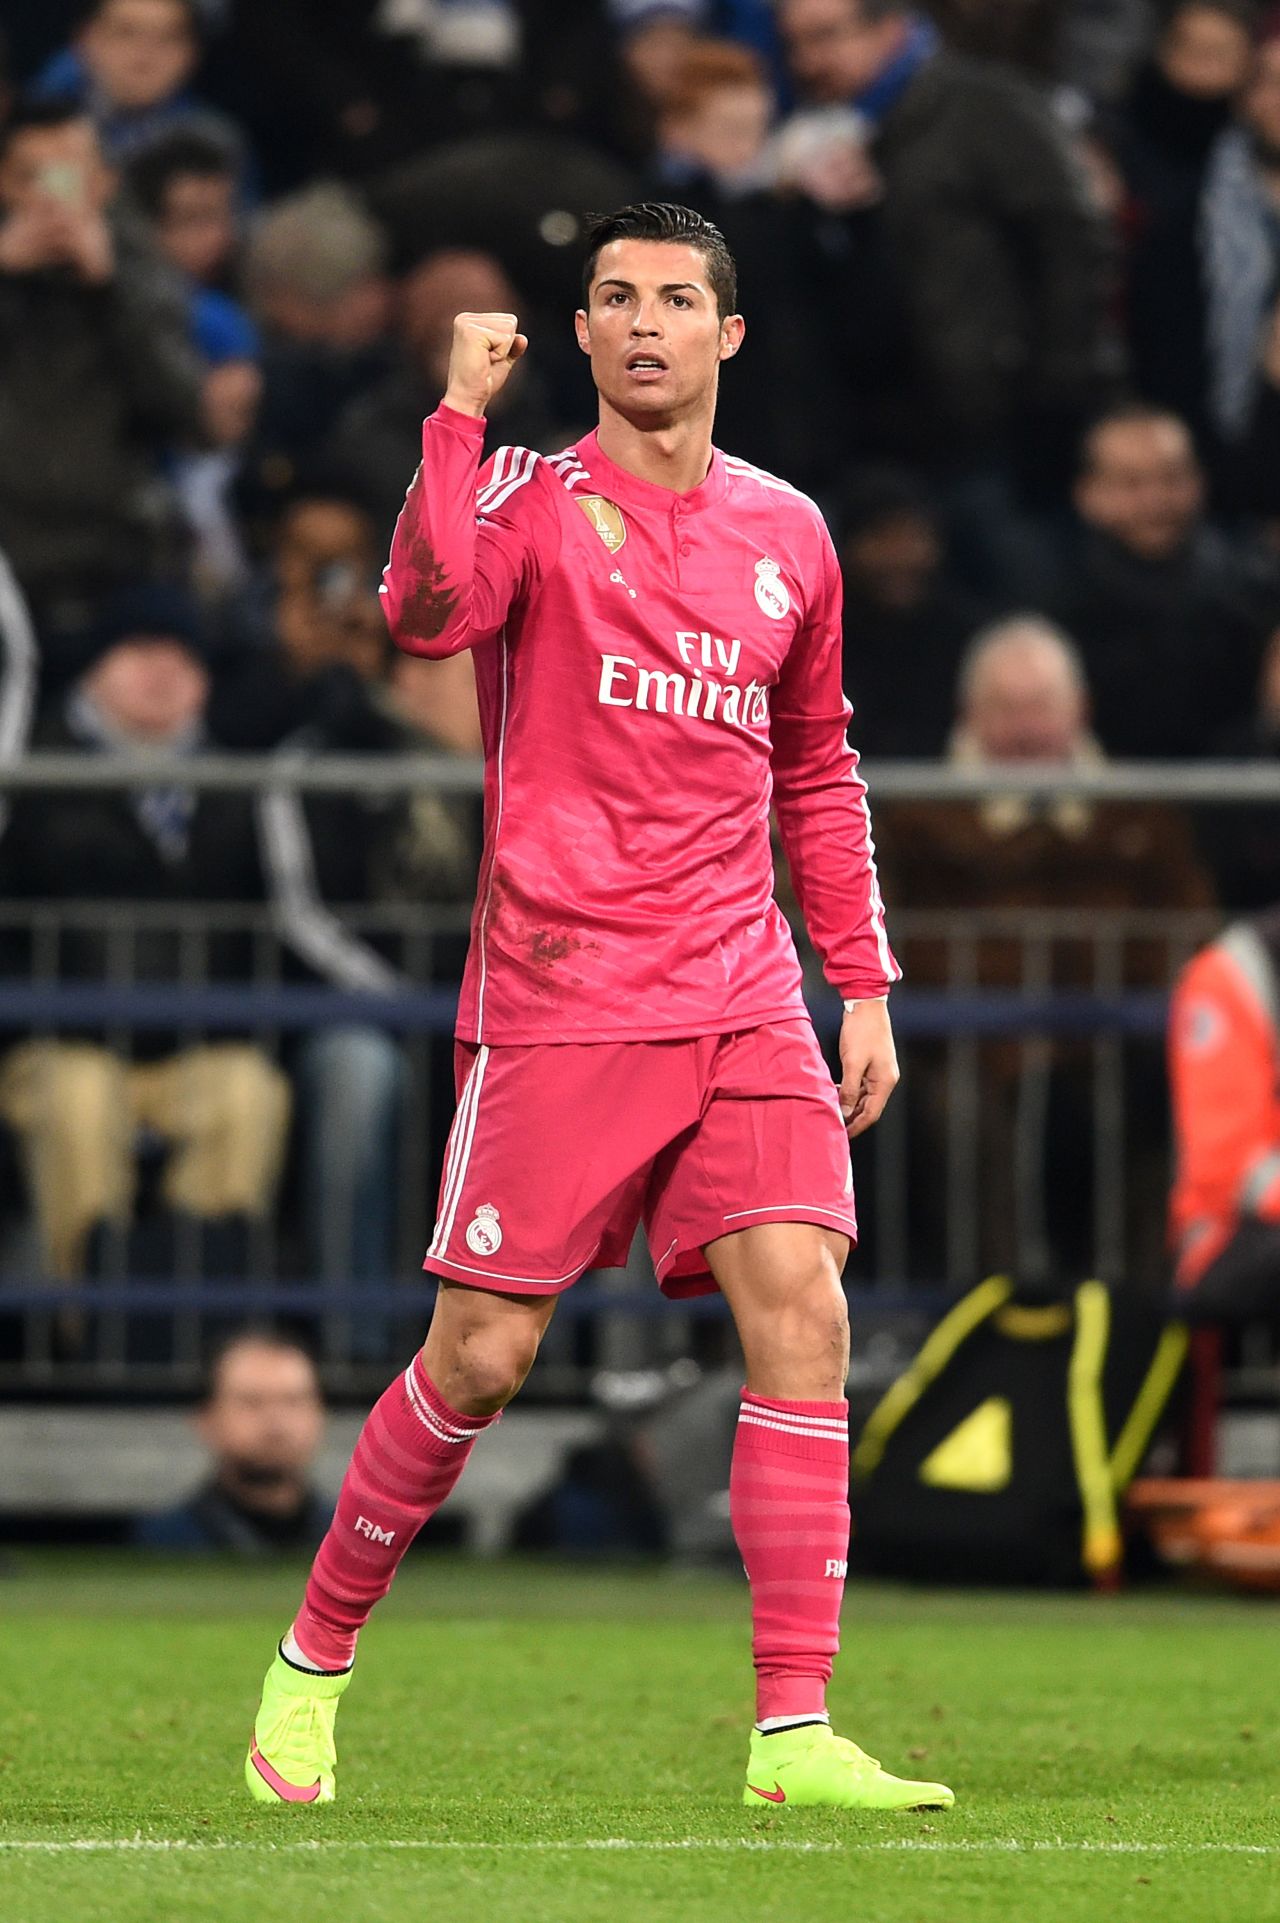 Real Madrid failed to win a trophy last season. On the upside, Ronaldo was named as the world's best player by FIFA and ended the season with 61 goals - three ahead of Messi.